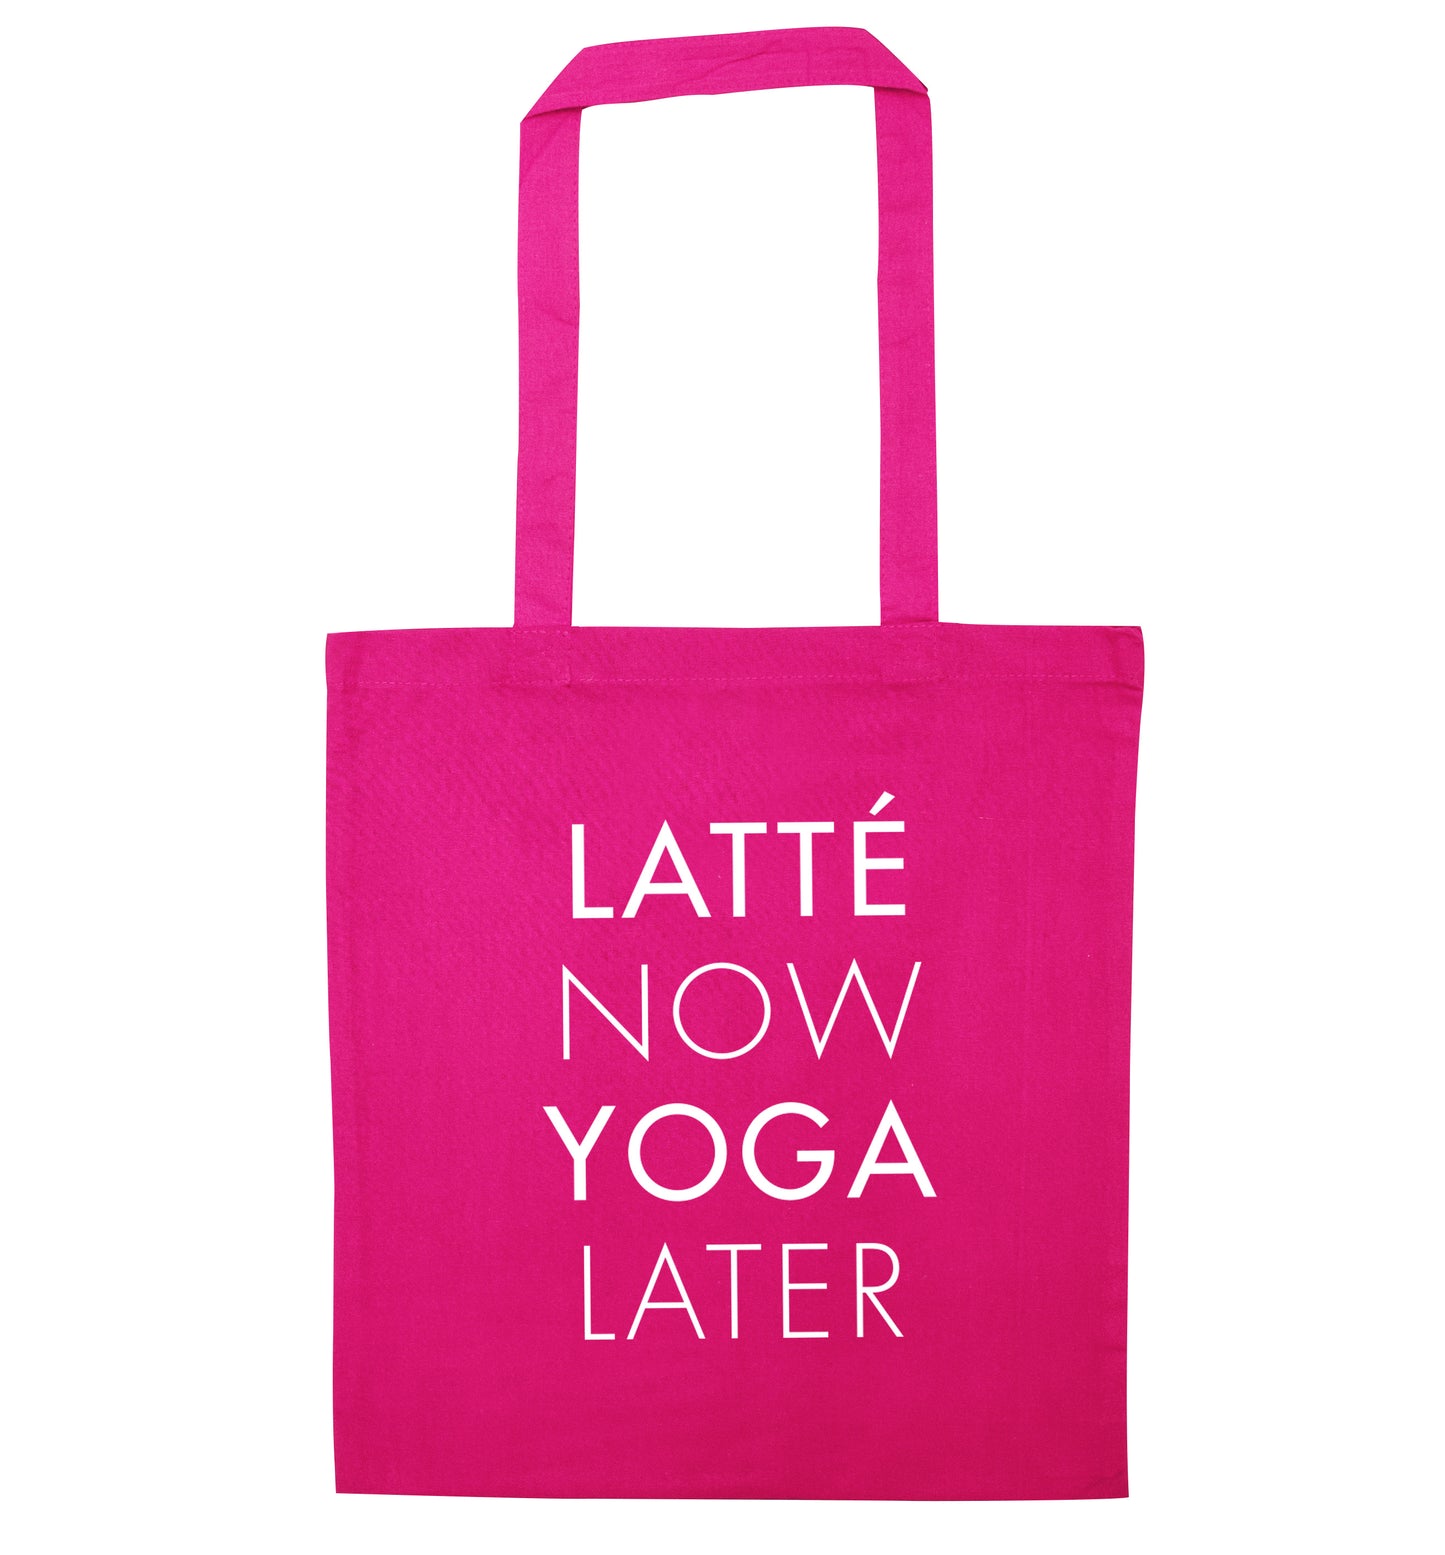 Latte now yoga later pink tote bag